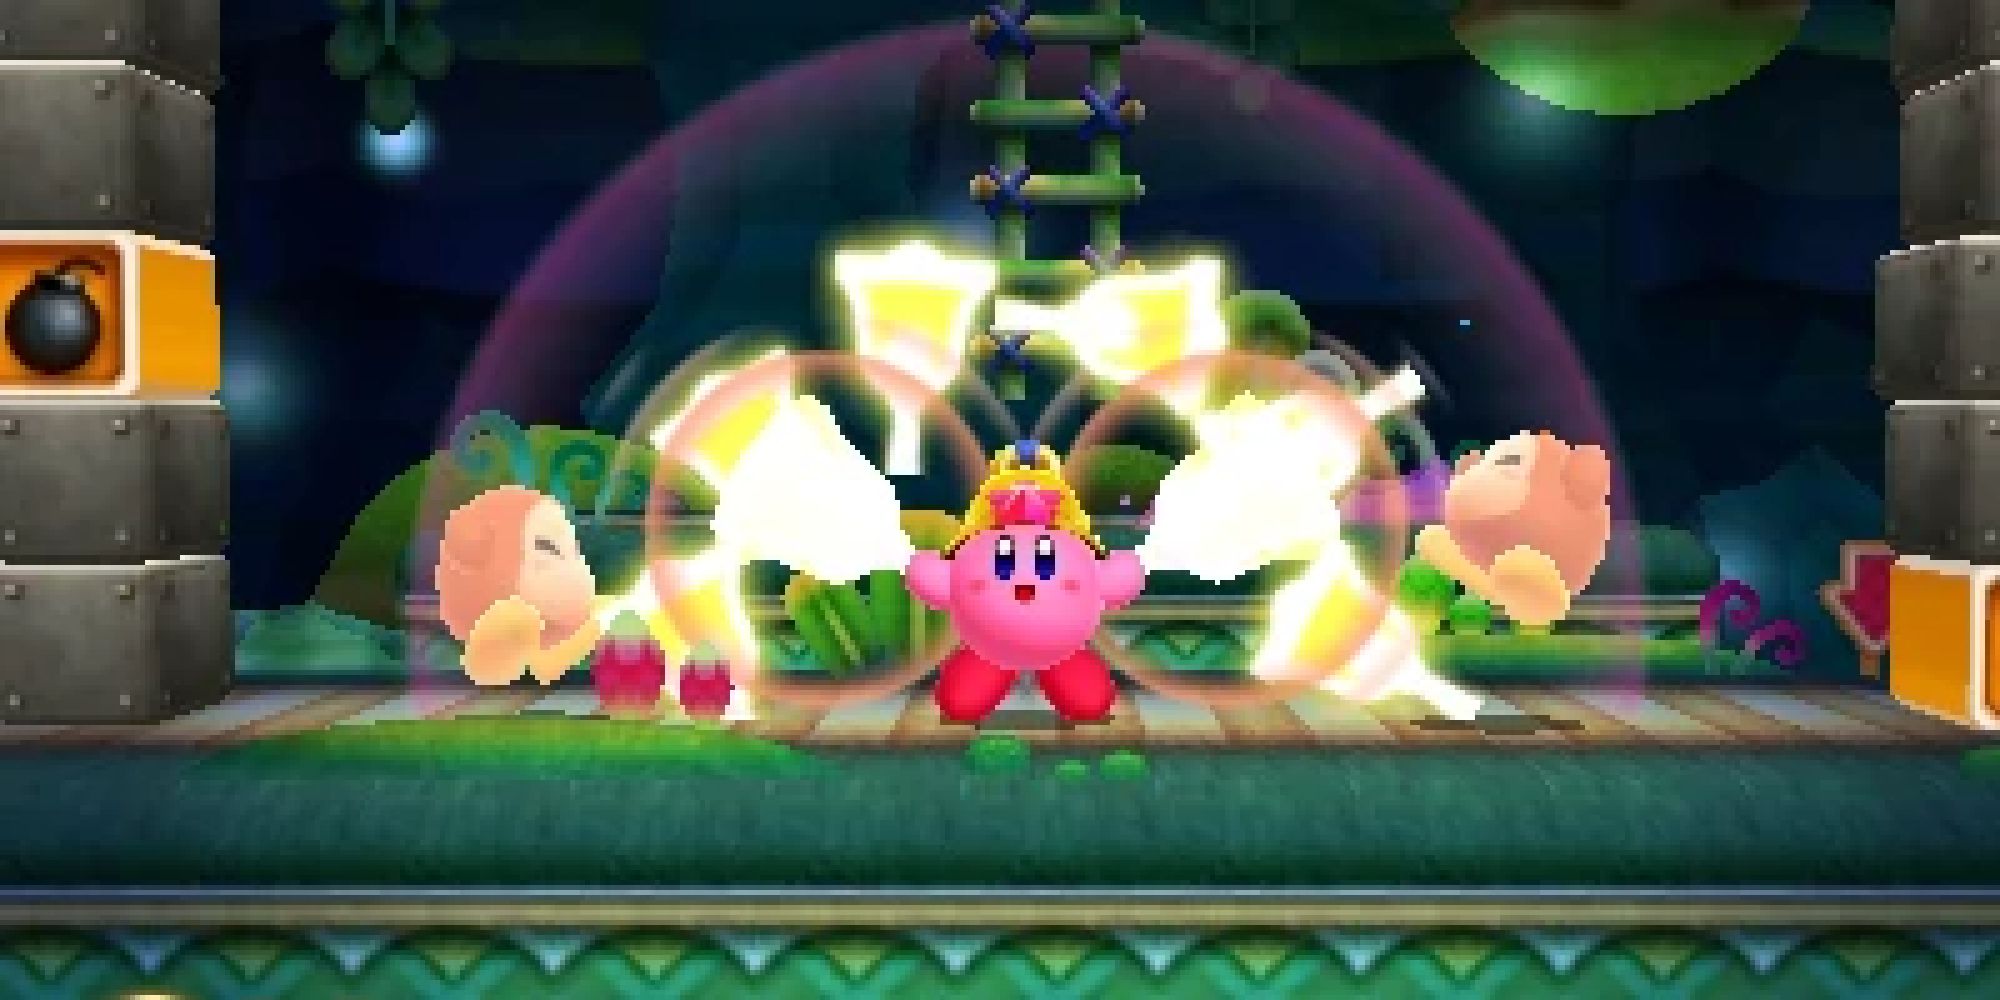 Kirby hitting two Waddle Dees with the Bell ability in Kirby Triple Deluxe